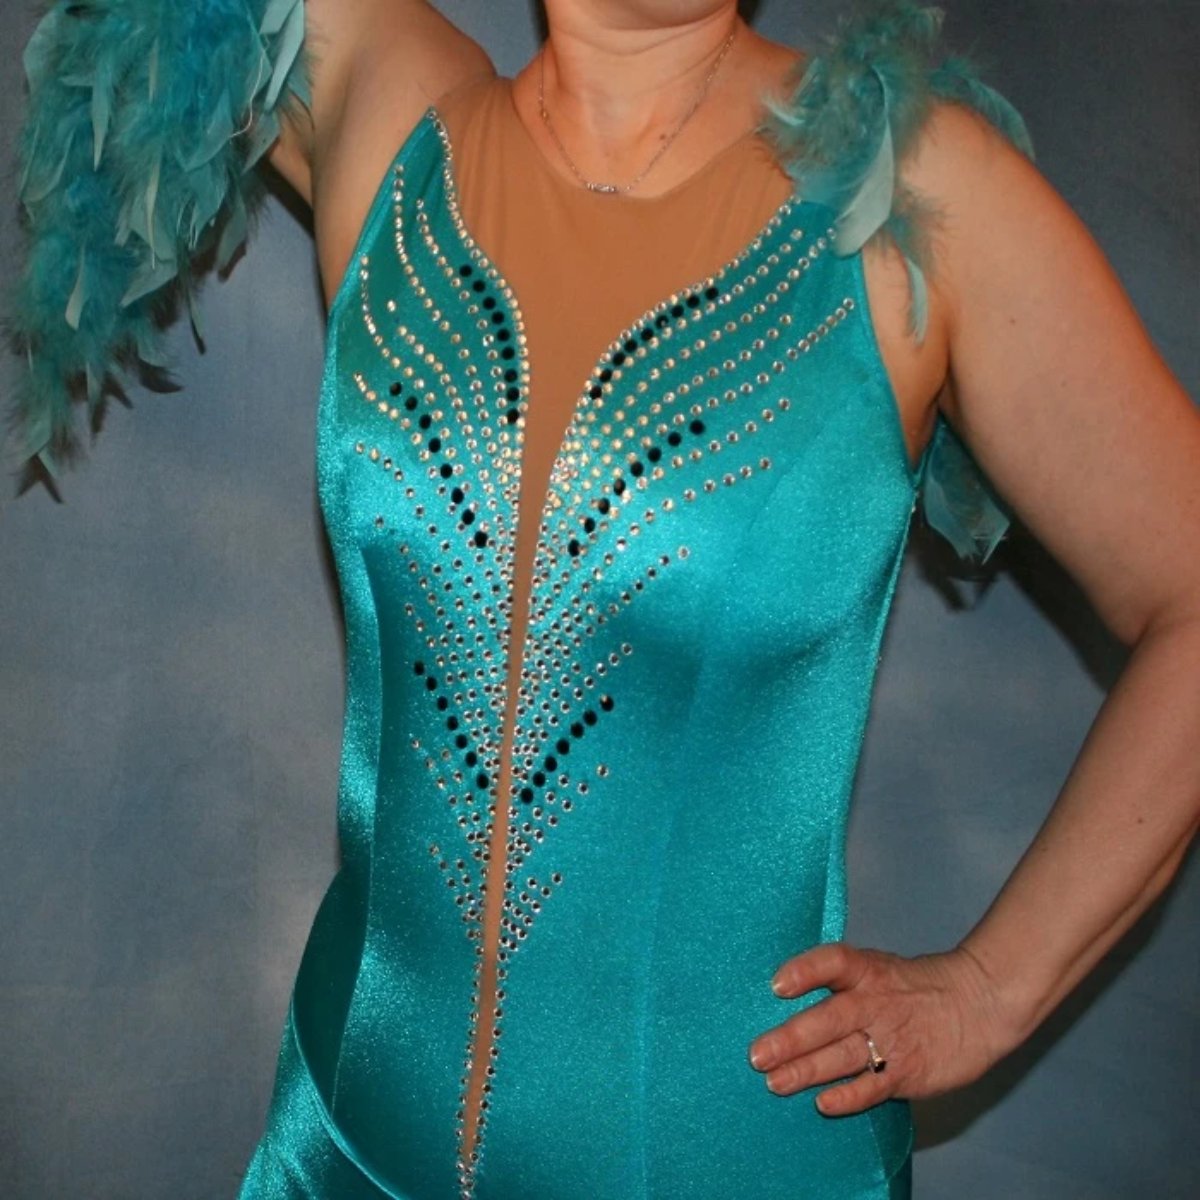 close upper view of Turquoise Latin/rhythm dance dress created in turquoise lycra on nude illusion, is embellished with crystal and jet black Swarovski rhinestones, with chandelle feathers and black spangles. The v styled skirt slits up high on both sides. Matching arm bands complete the look.